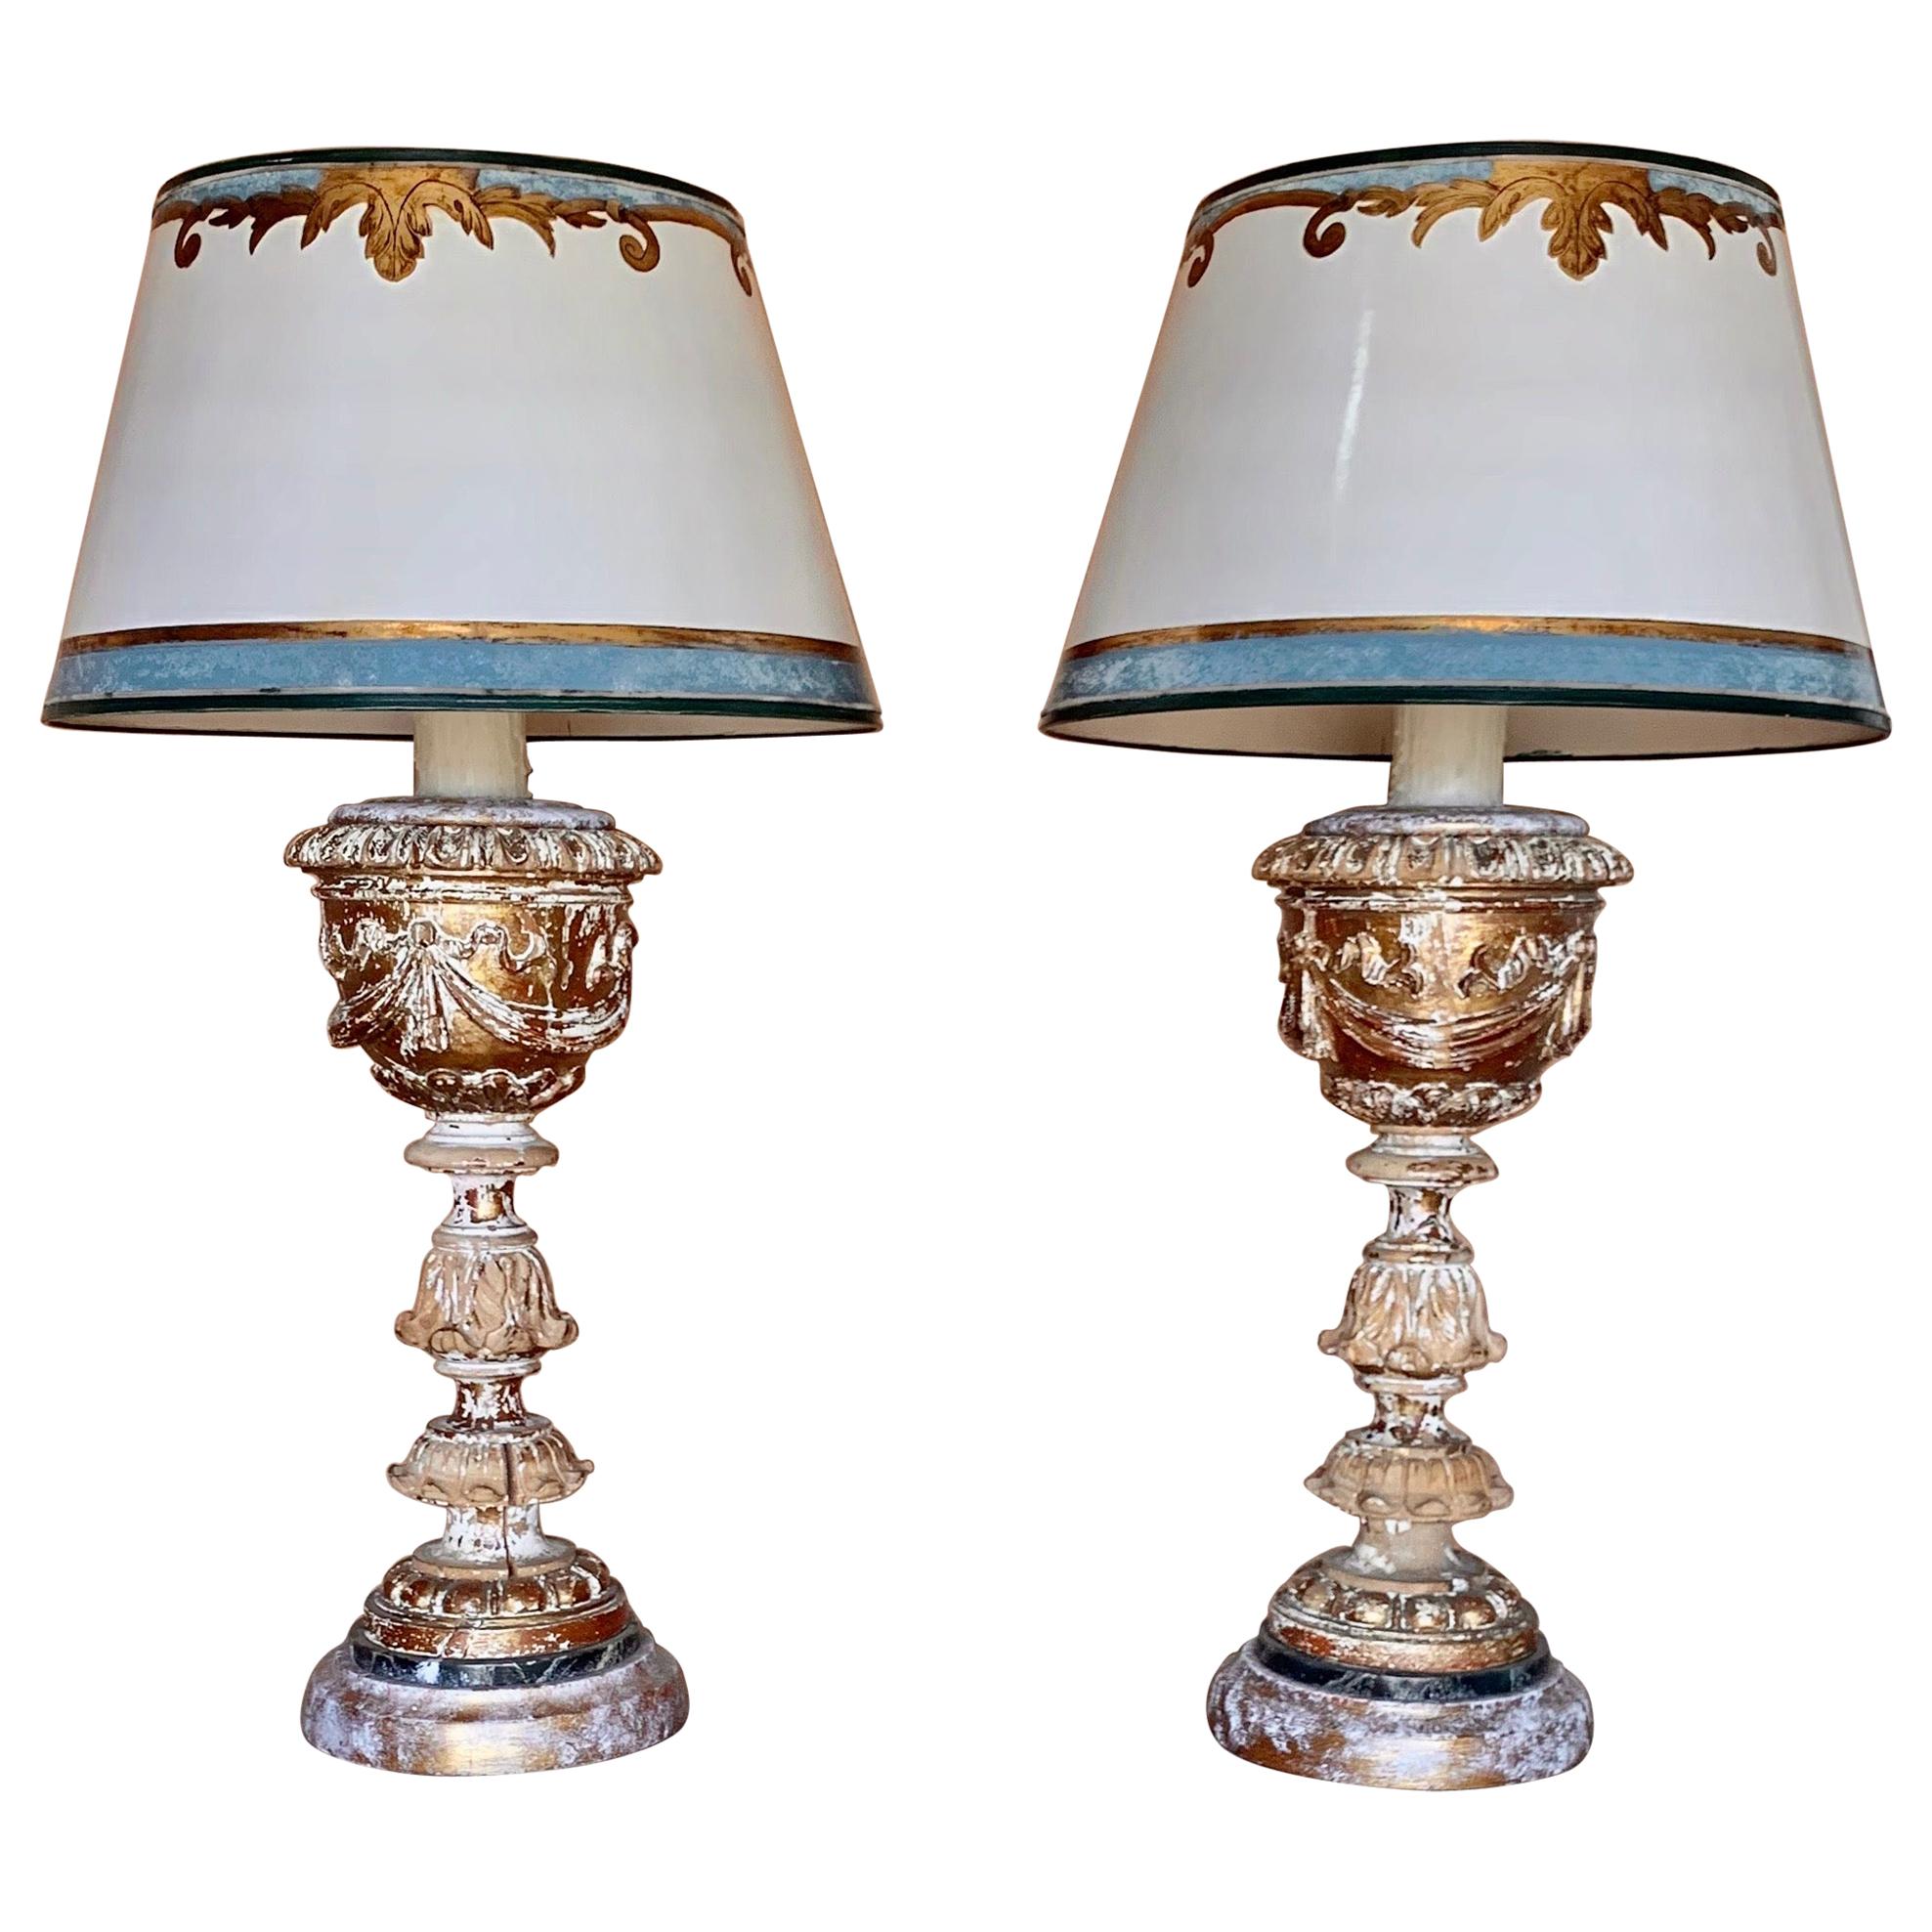 Pair of Italian Giltwood Lamps with Parchment Shades